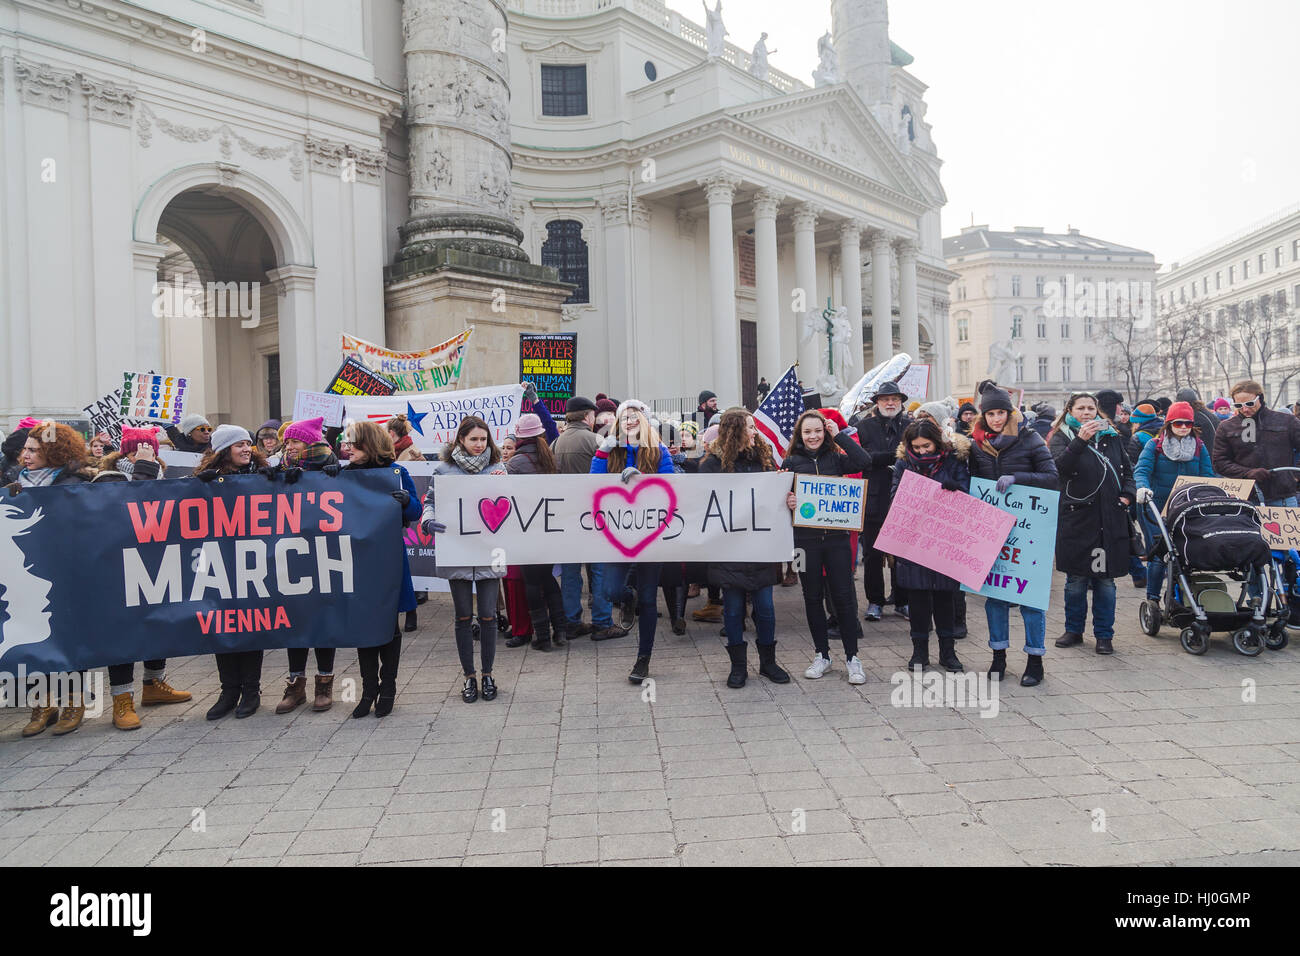 Vienna, Austria. 21st Jan, 2017. A peaceful protest in Vienna Austria, following the start of Donald Trump's presidency of the United States of America. Credit: Mike Clegg/Alamy Live News. Stock Photo